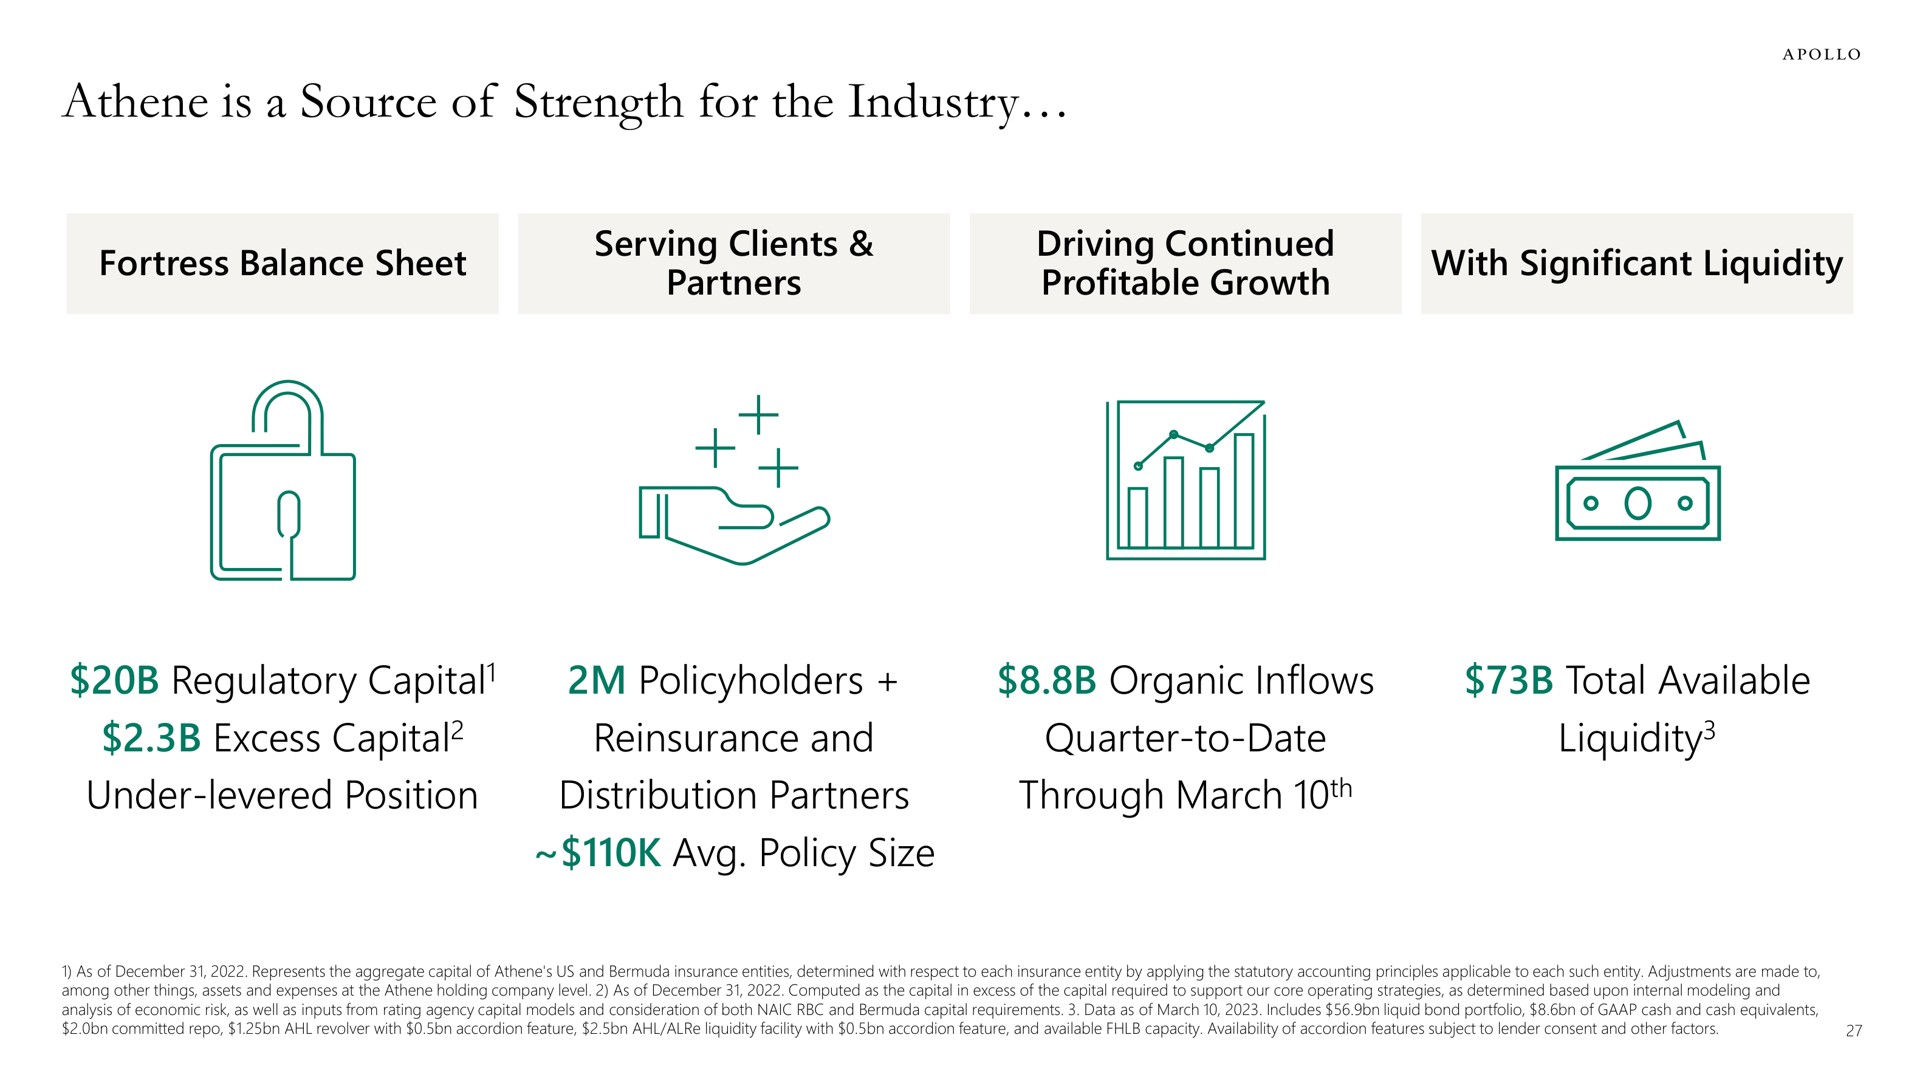 is a source of strength for the industry regulatory capital excess capital under levered position policyholders policy size organic inflows quarter to date through march liquidity | Apollo Global Management